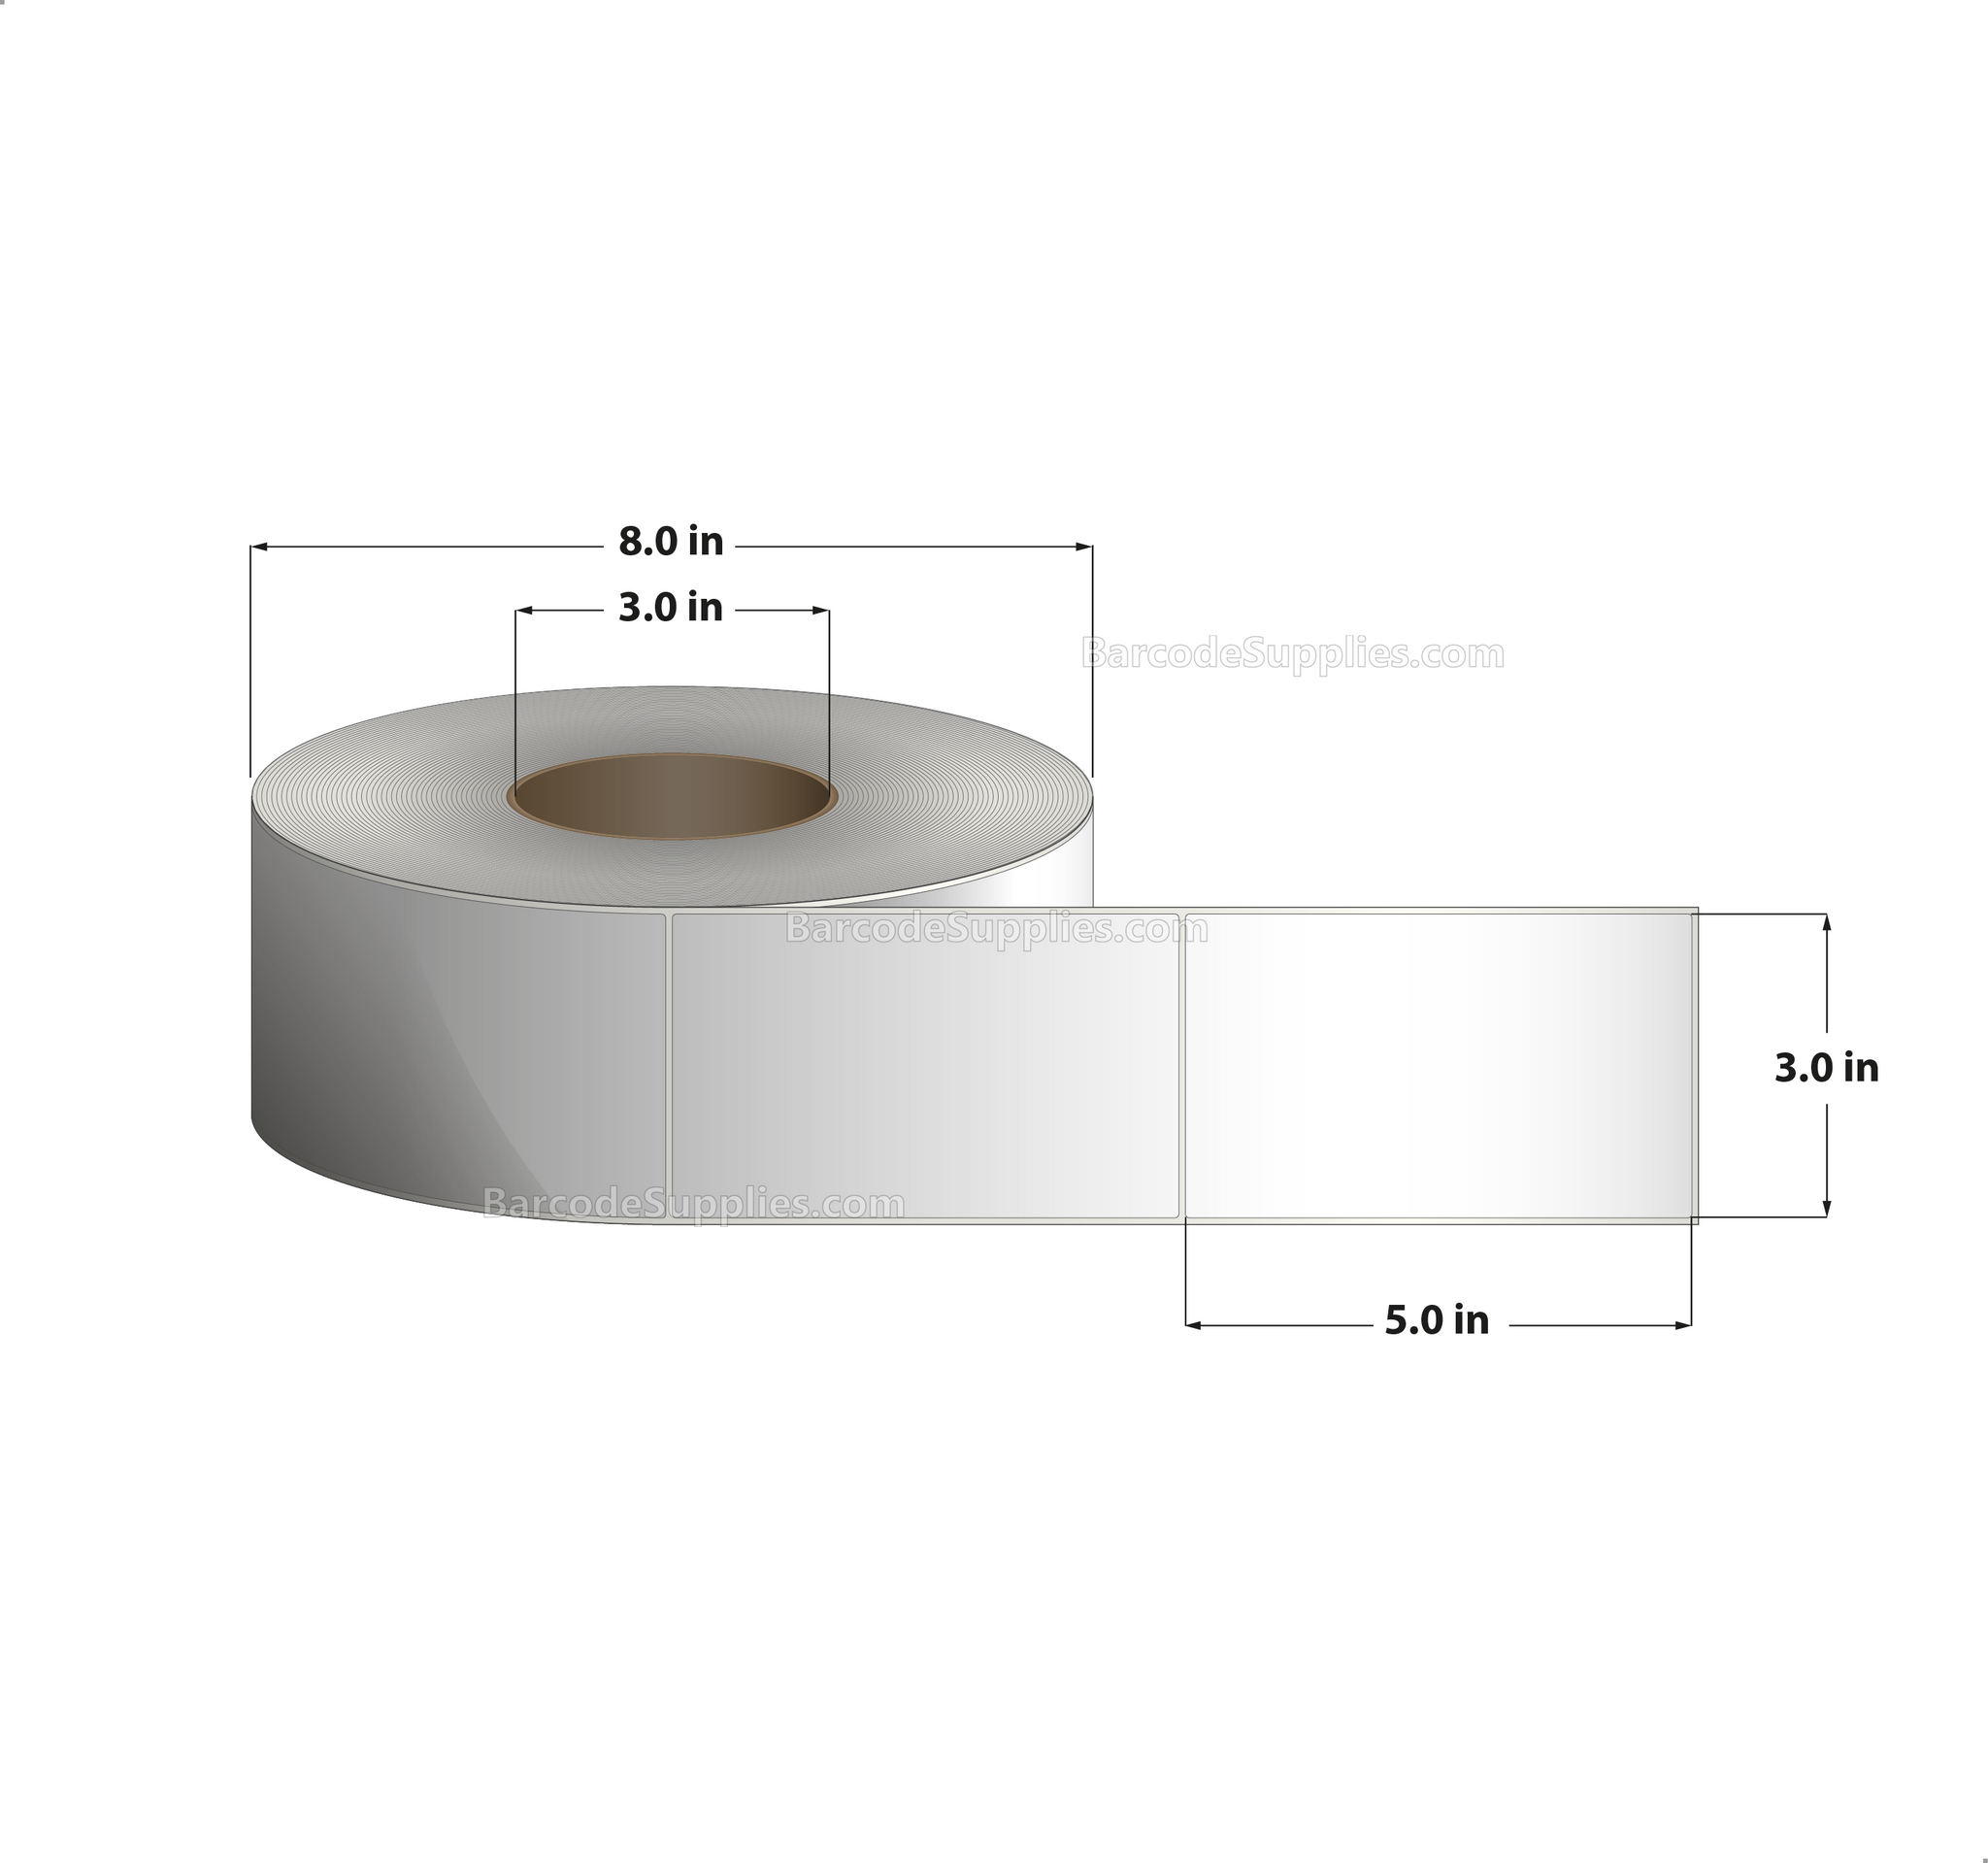 3 x 5 Thermal Transfer White Labels With Rubber Adhesive - No Perforation - 1300 Labels Per Roll - Carton Of 6 Rolls - 7800 Labels Total - MPN: CTT300500-3